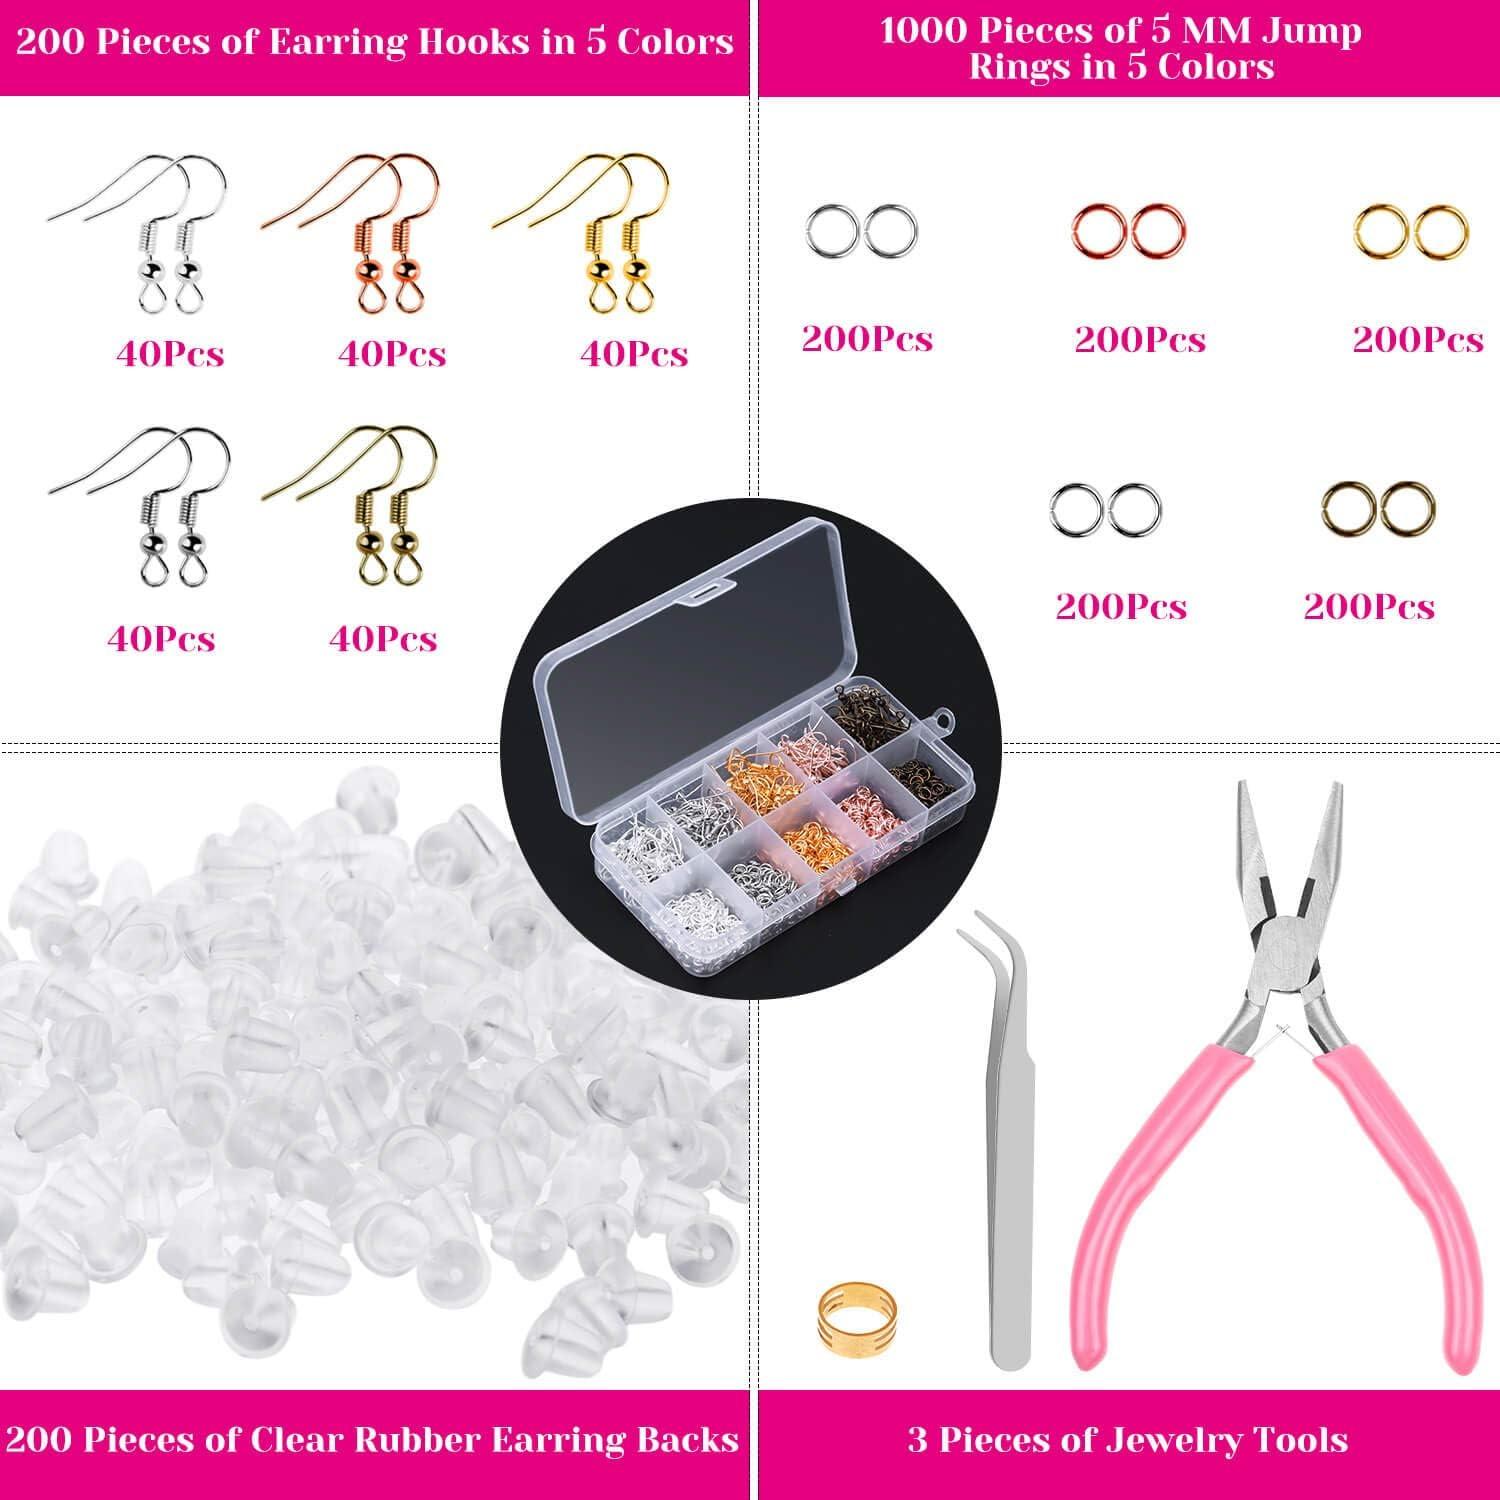 Earring Hooks, Audab 1400pcs Earring Making Kit with 200pcs Ear Ring Hooks,  1000pcs Jump Rings, 200pcs Earring Backs and Jewelry Pliers for Jewelry Making  Supplies Earring Findings